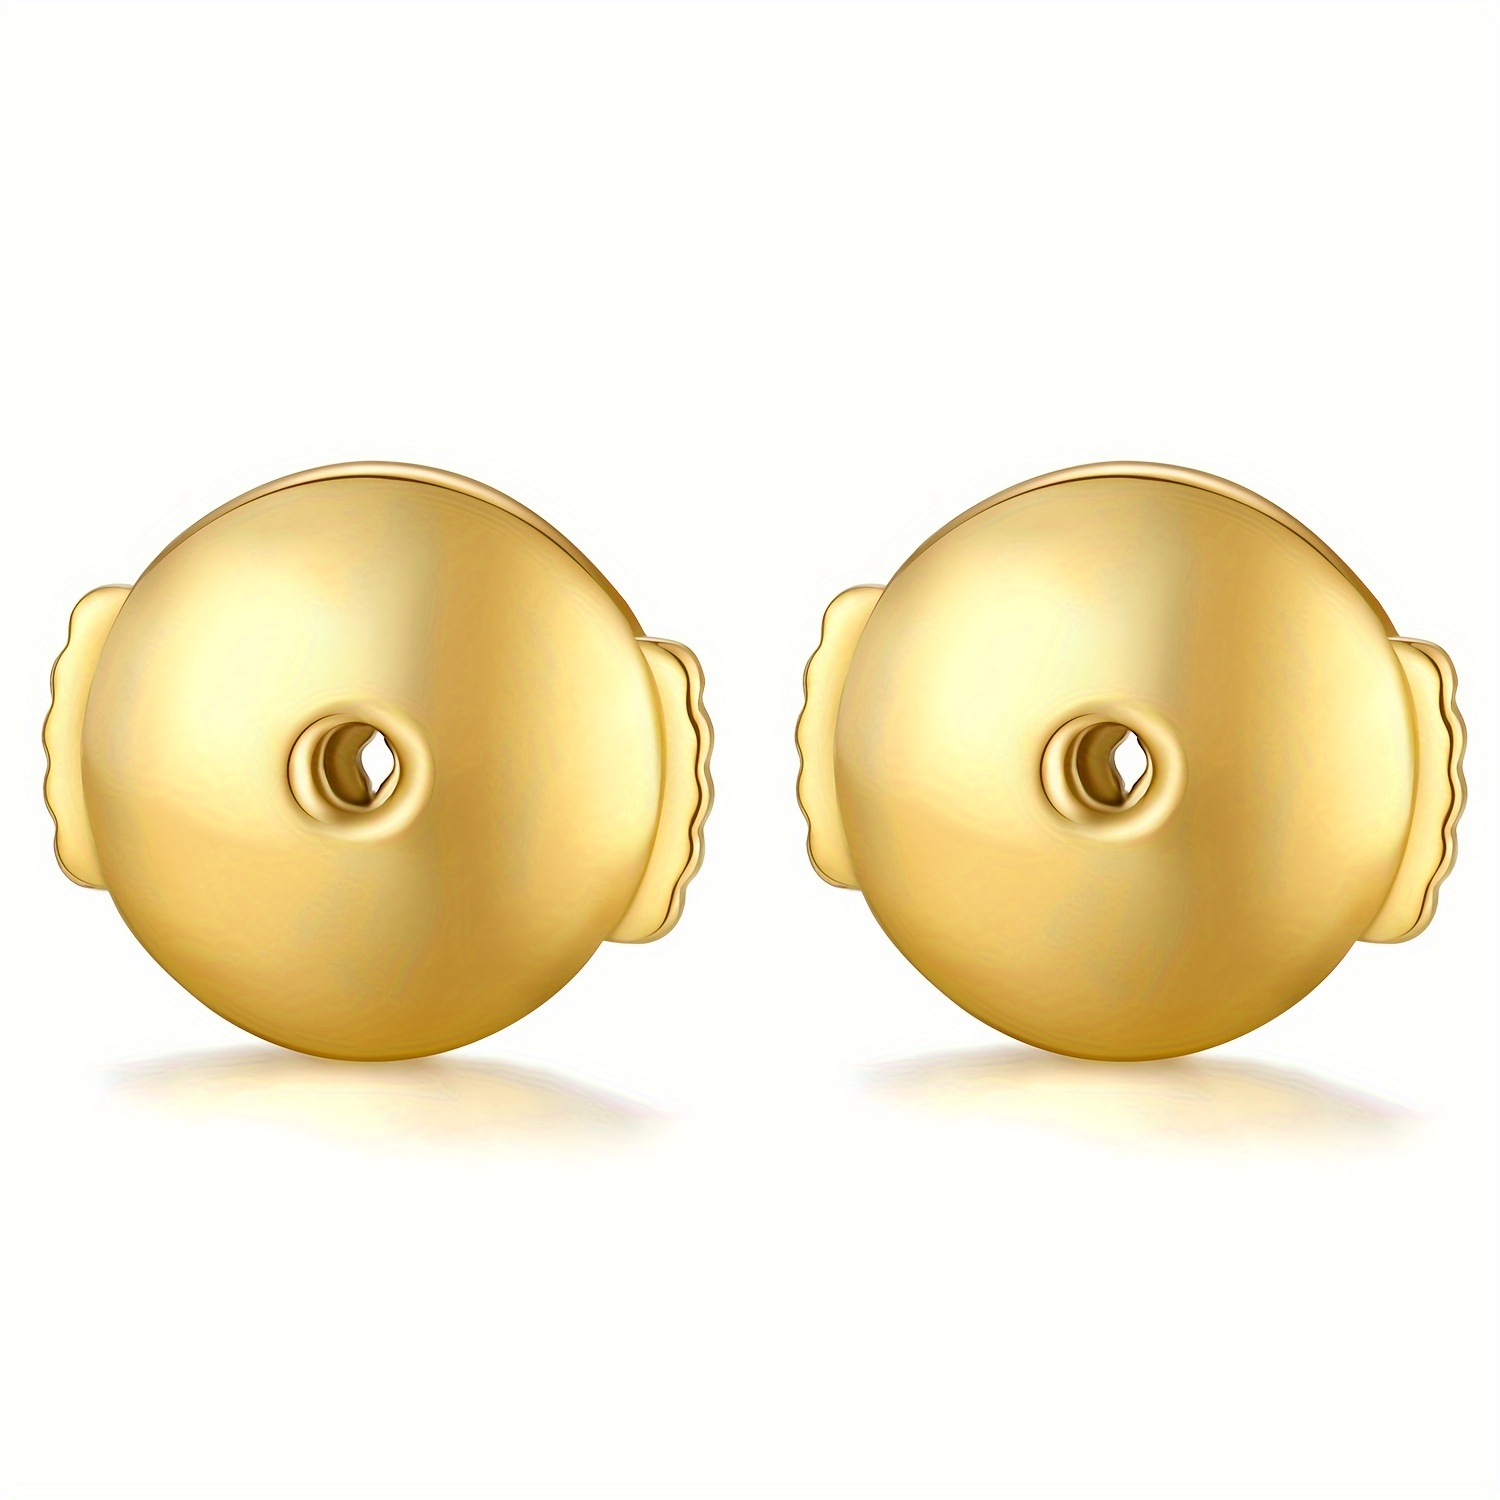 10 pair Gold Earring Backs Soft Clear Silicone Padded Mushroom Safety Grip Earring  Backings Secure Hypoallergenic Pierced Studs Silver Back K-921 K-922